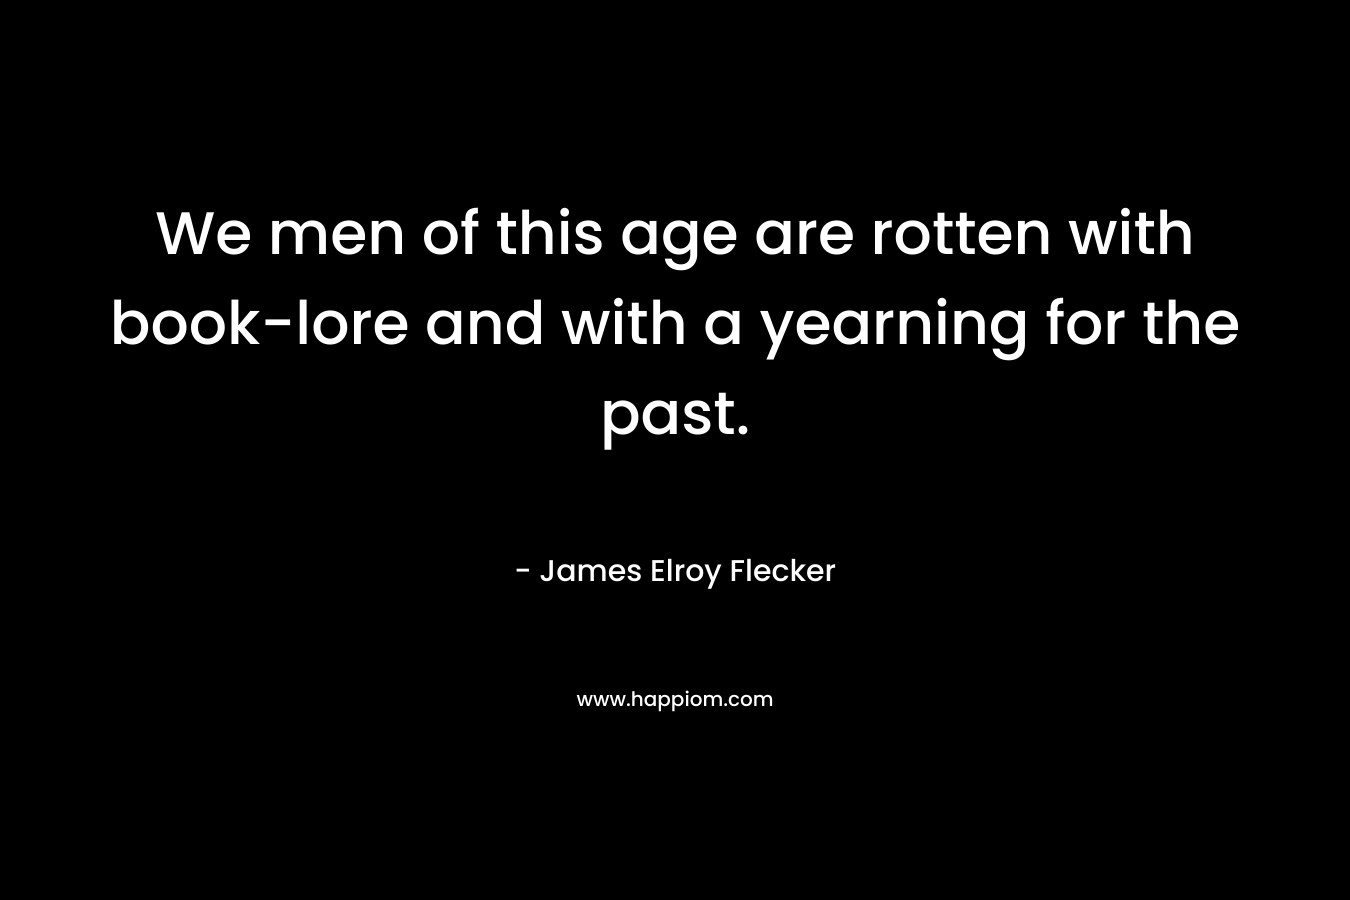 We men of this age are rotten with book-lore and with a yearning for the past. – James Elroy Flecker